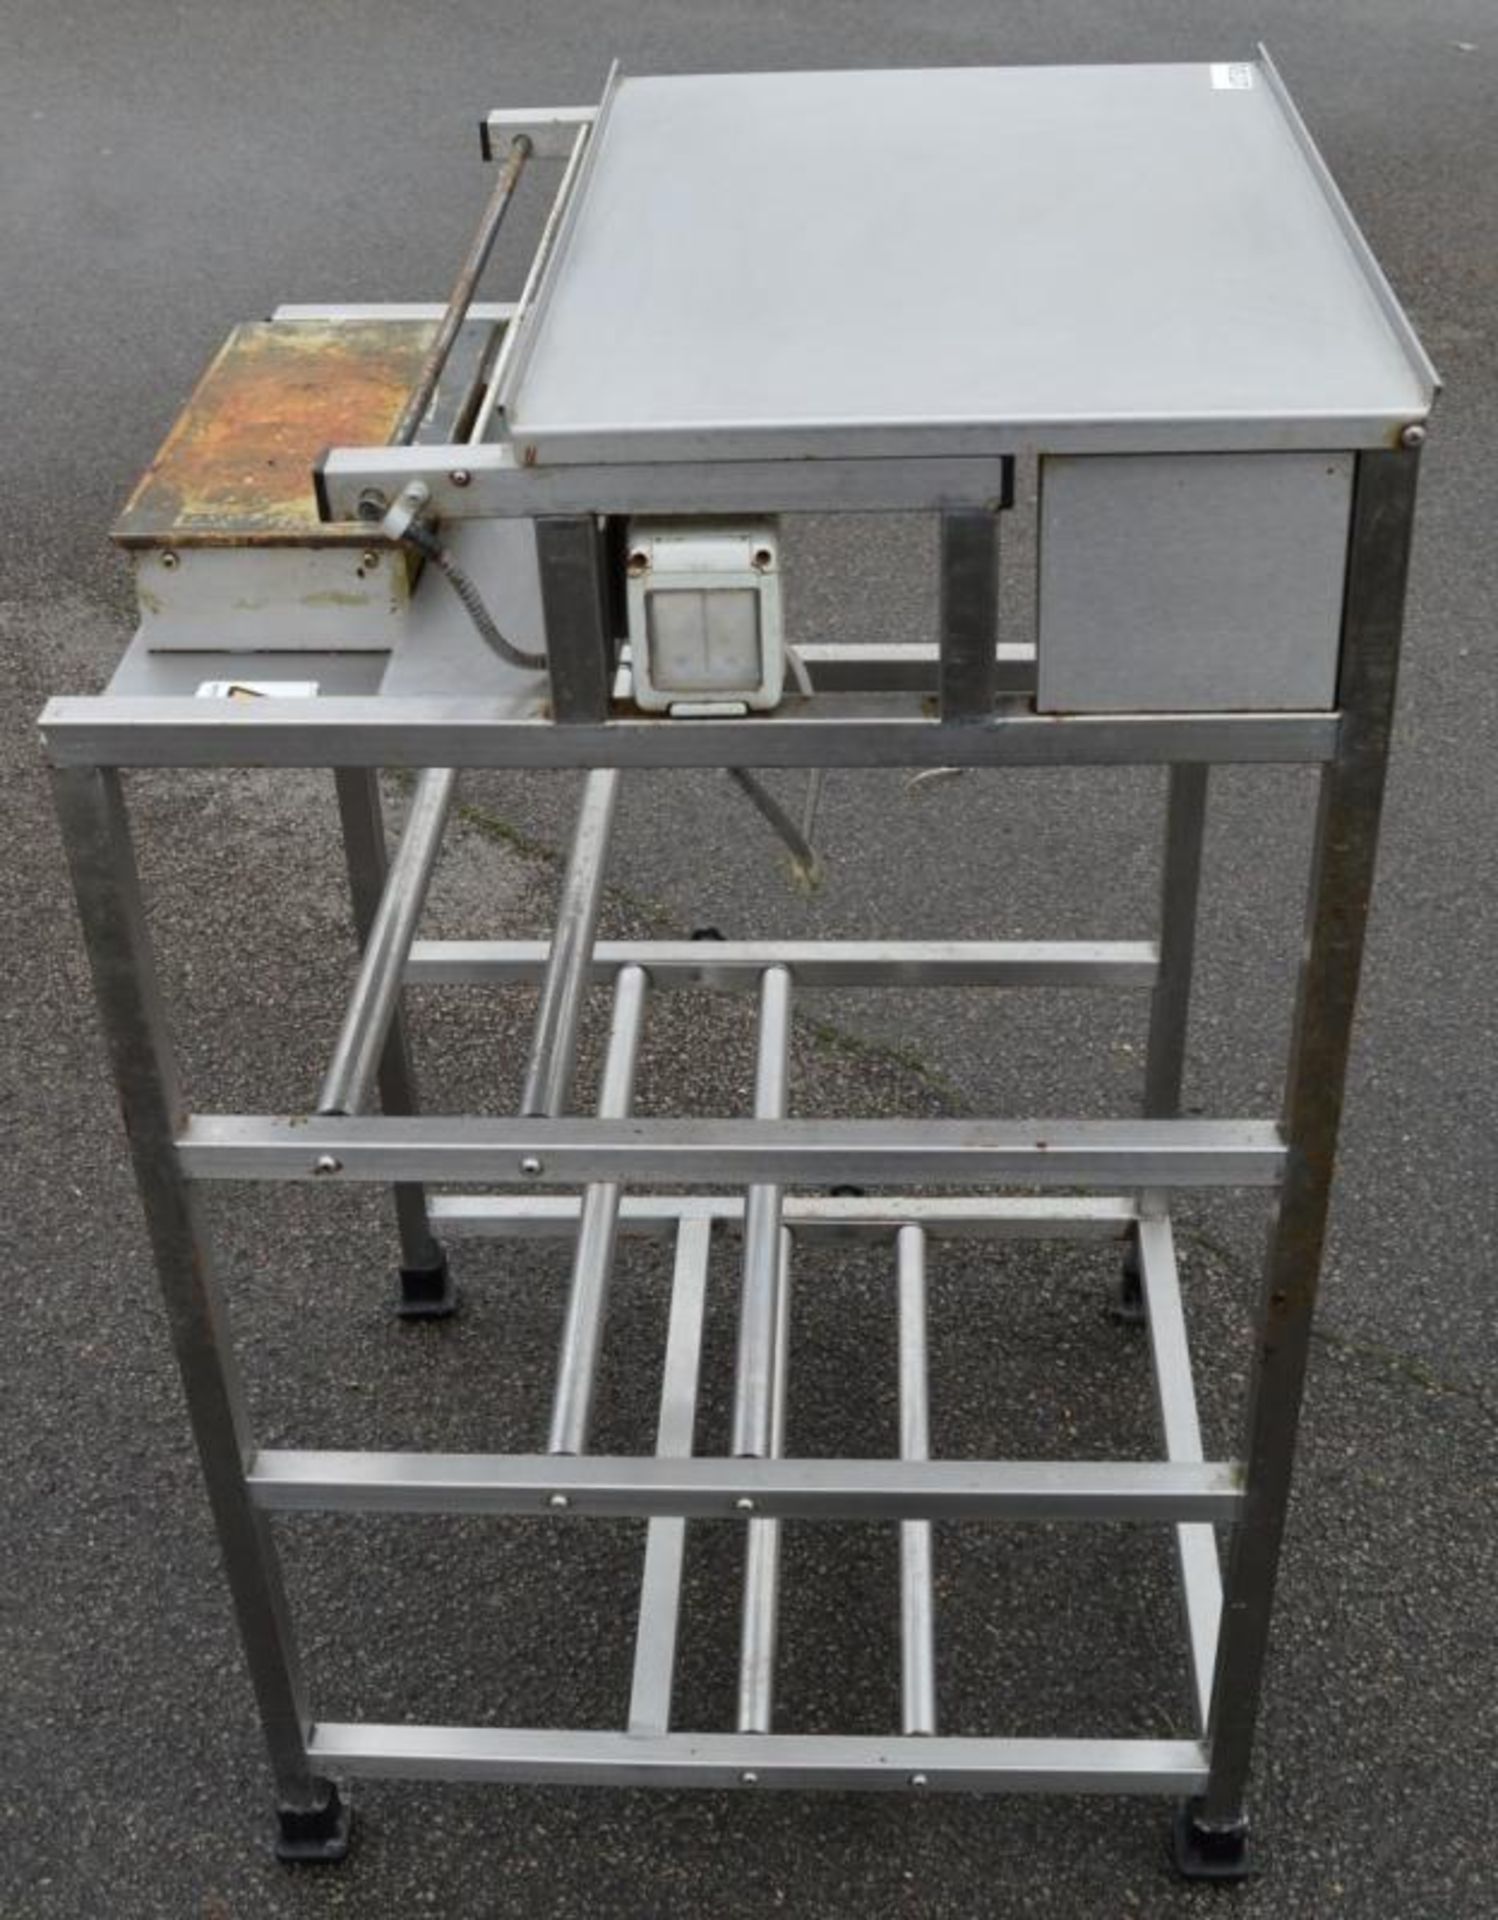 1 x Freestanding Stretch Wrap Tray Overwapper Machine - Stainless Steel Constructons - 240v - - Image 2 of 7